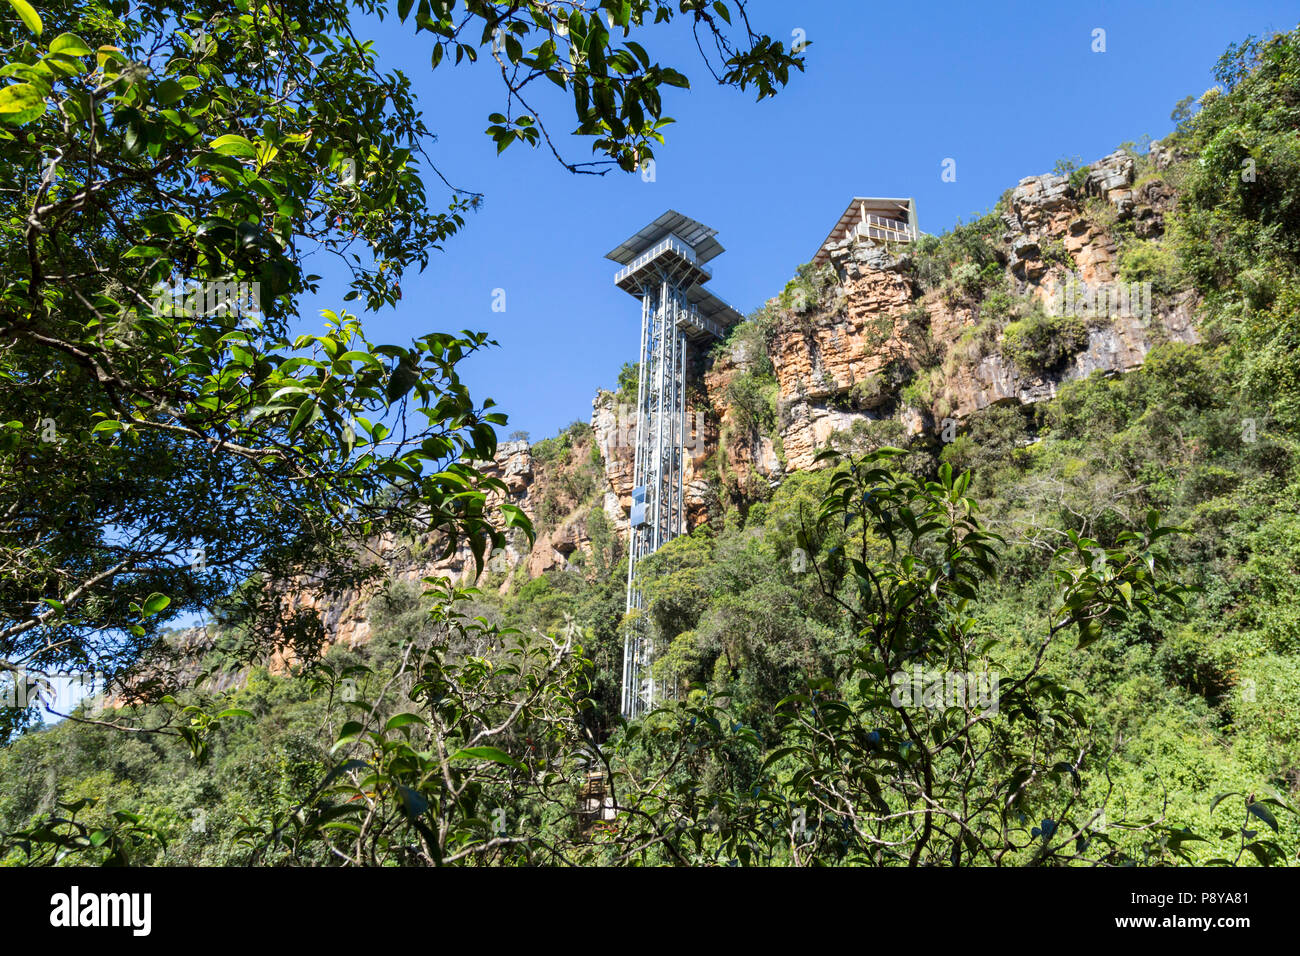 The  Graskop gorge lift company's vertical lift into the popular gorge forest  site Stock Photo